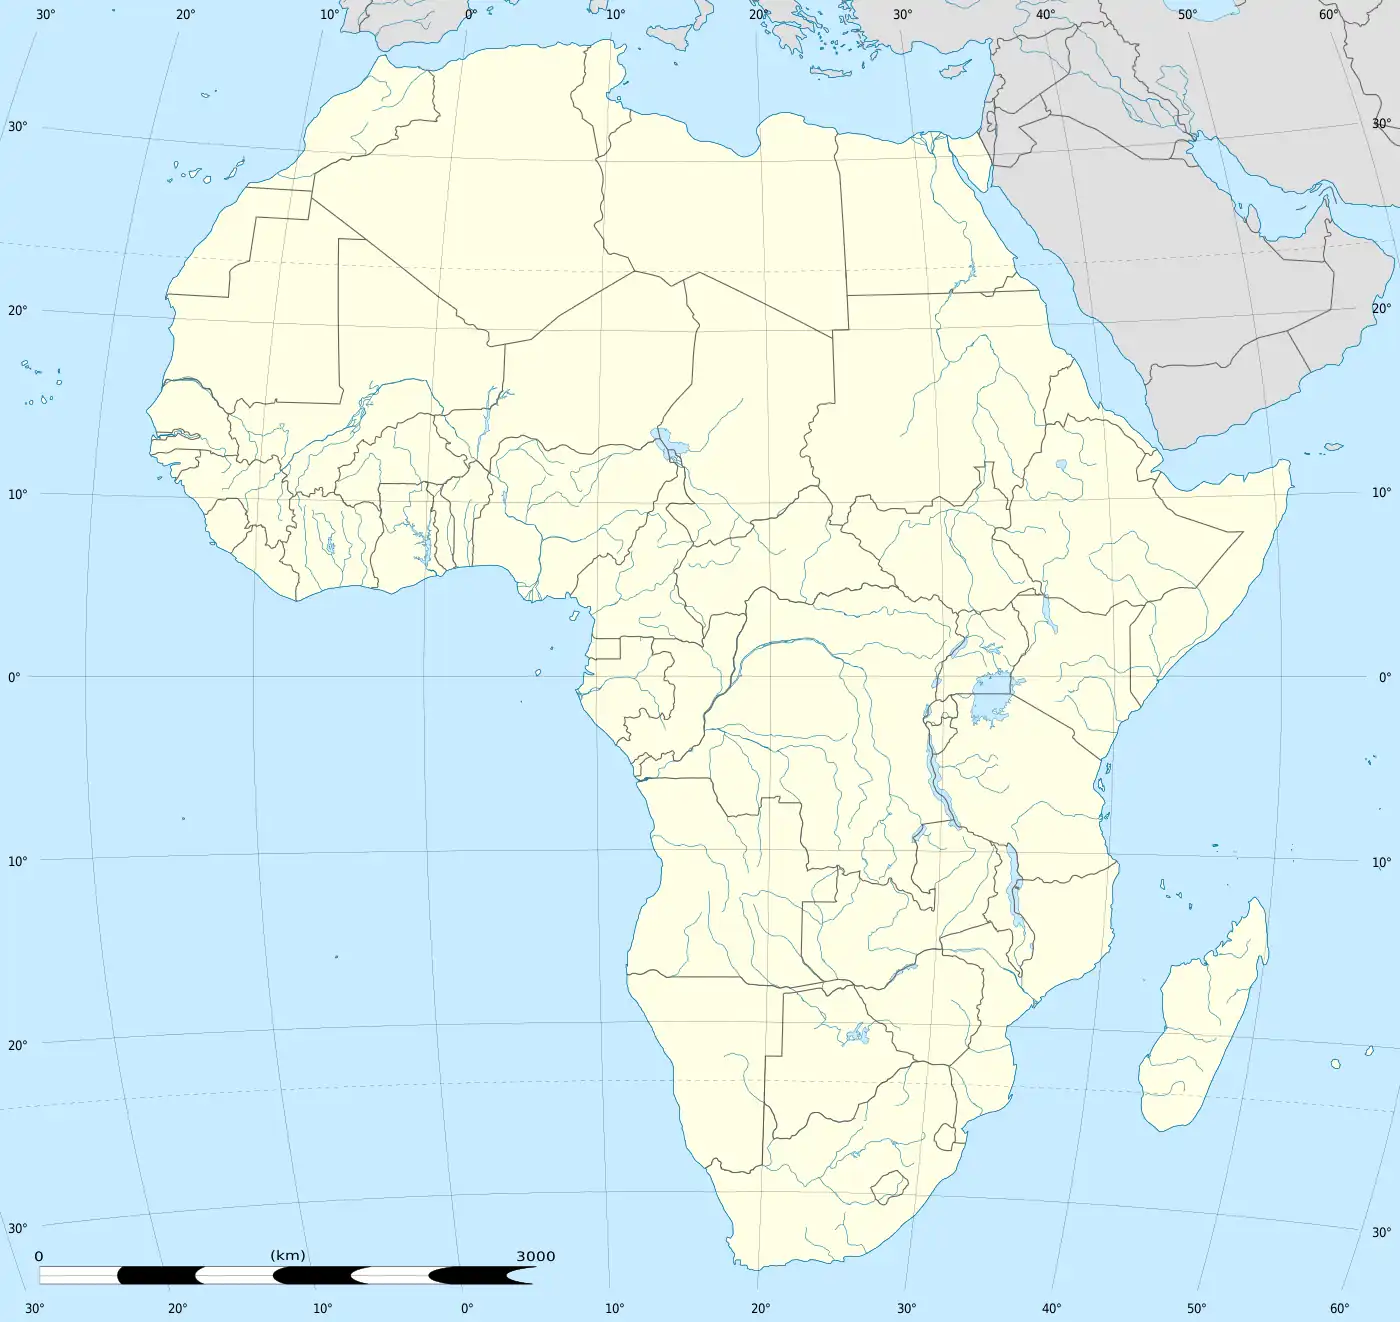 Makhanda is located in Africa